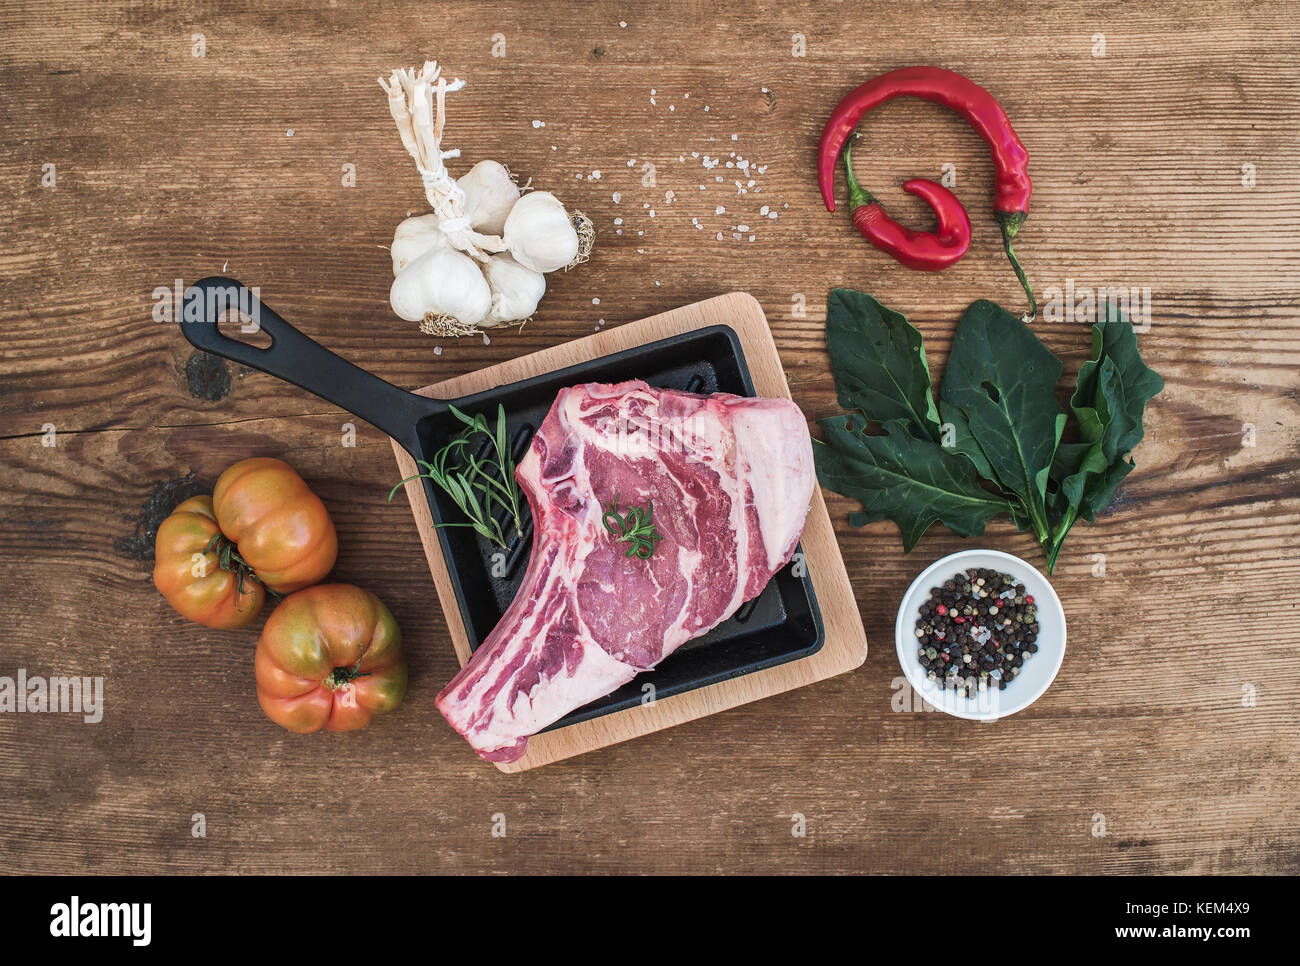 Raw fresh meat ribeye steak with pepper, salt, chili, garlic, spinach, heirloom tomatoes and rosemary in cooking pan over rustic wooden background, top view. Stock Photo